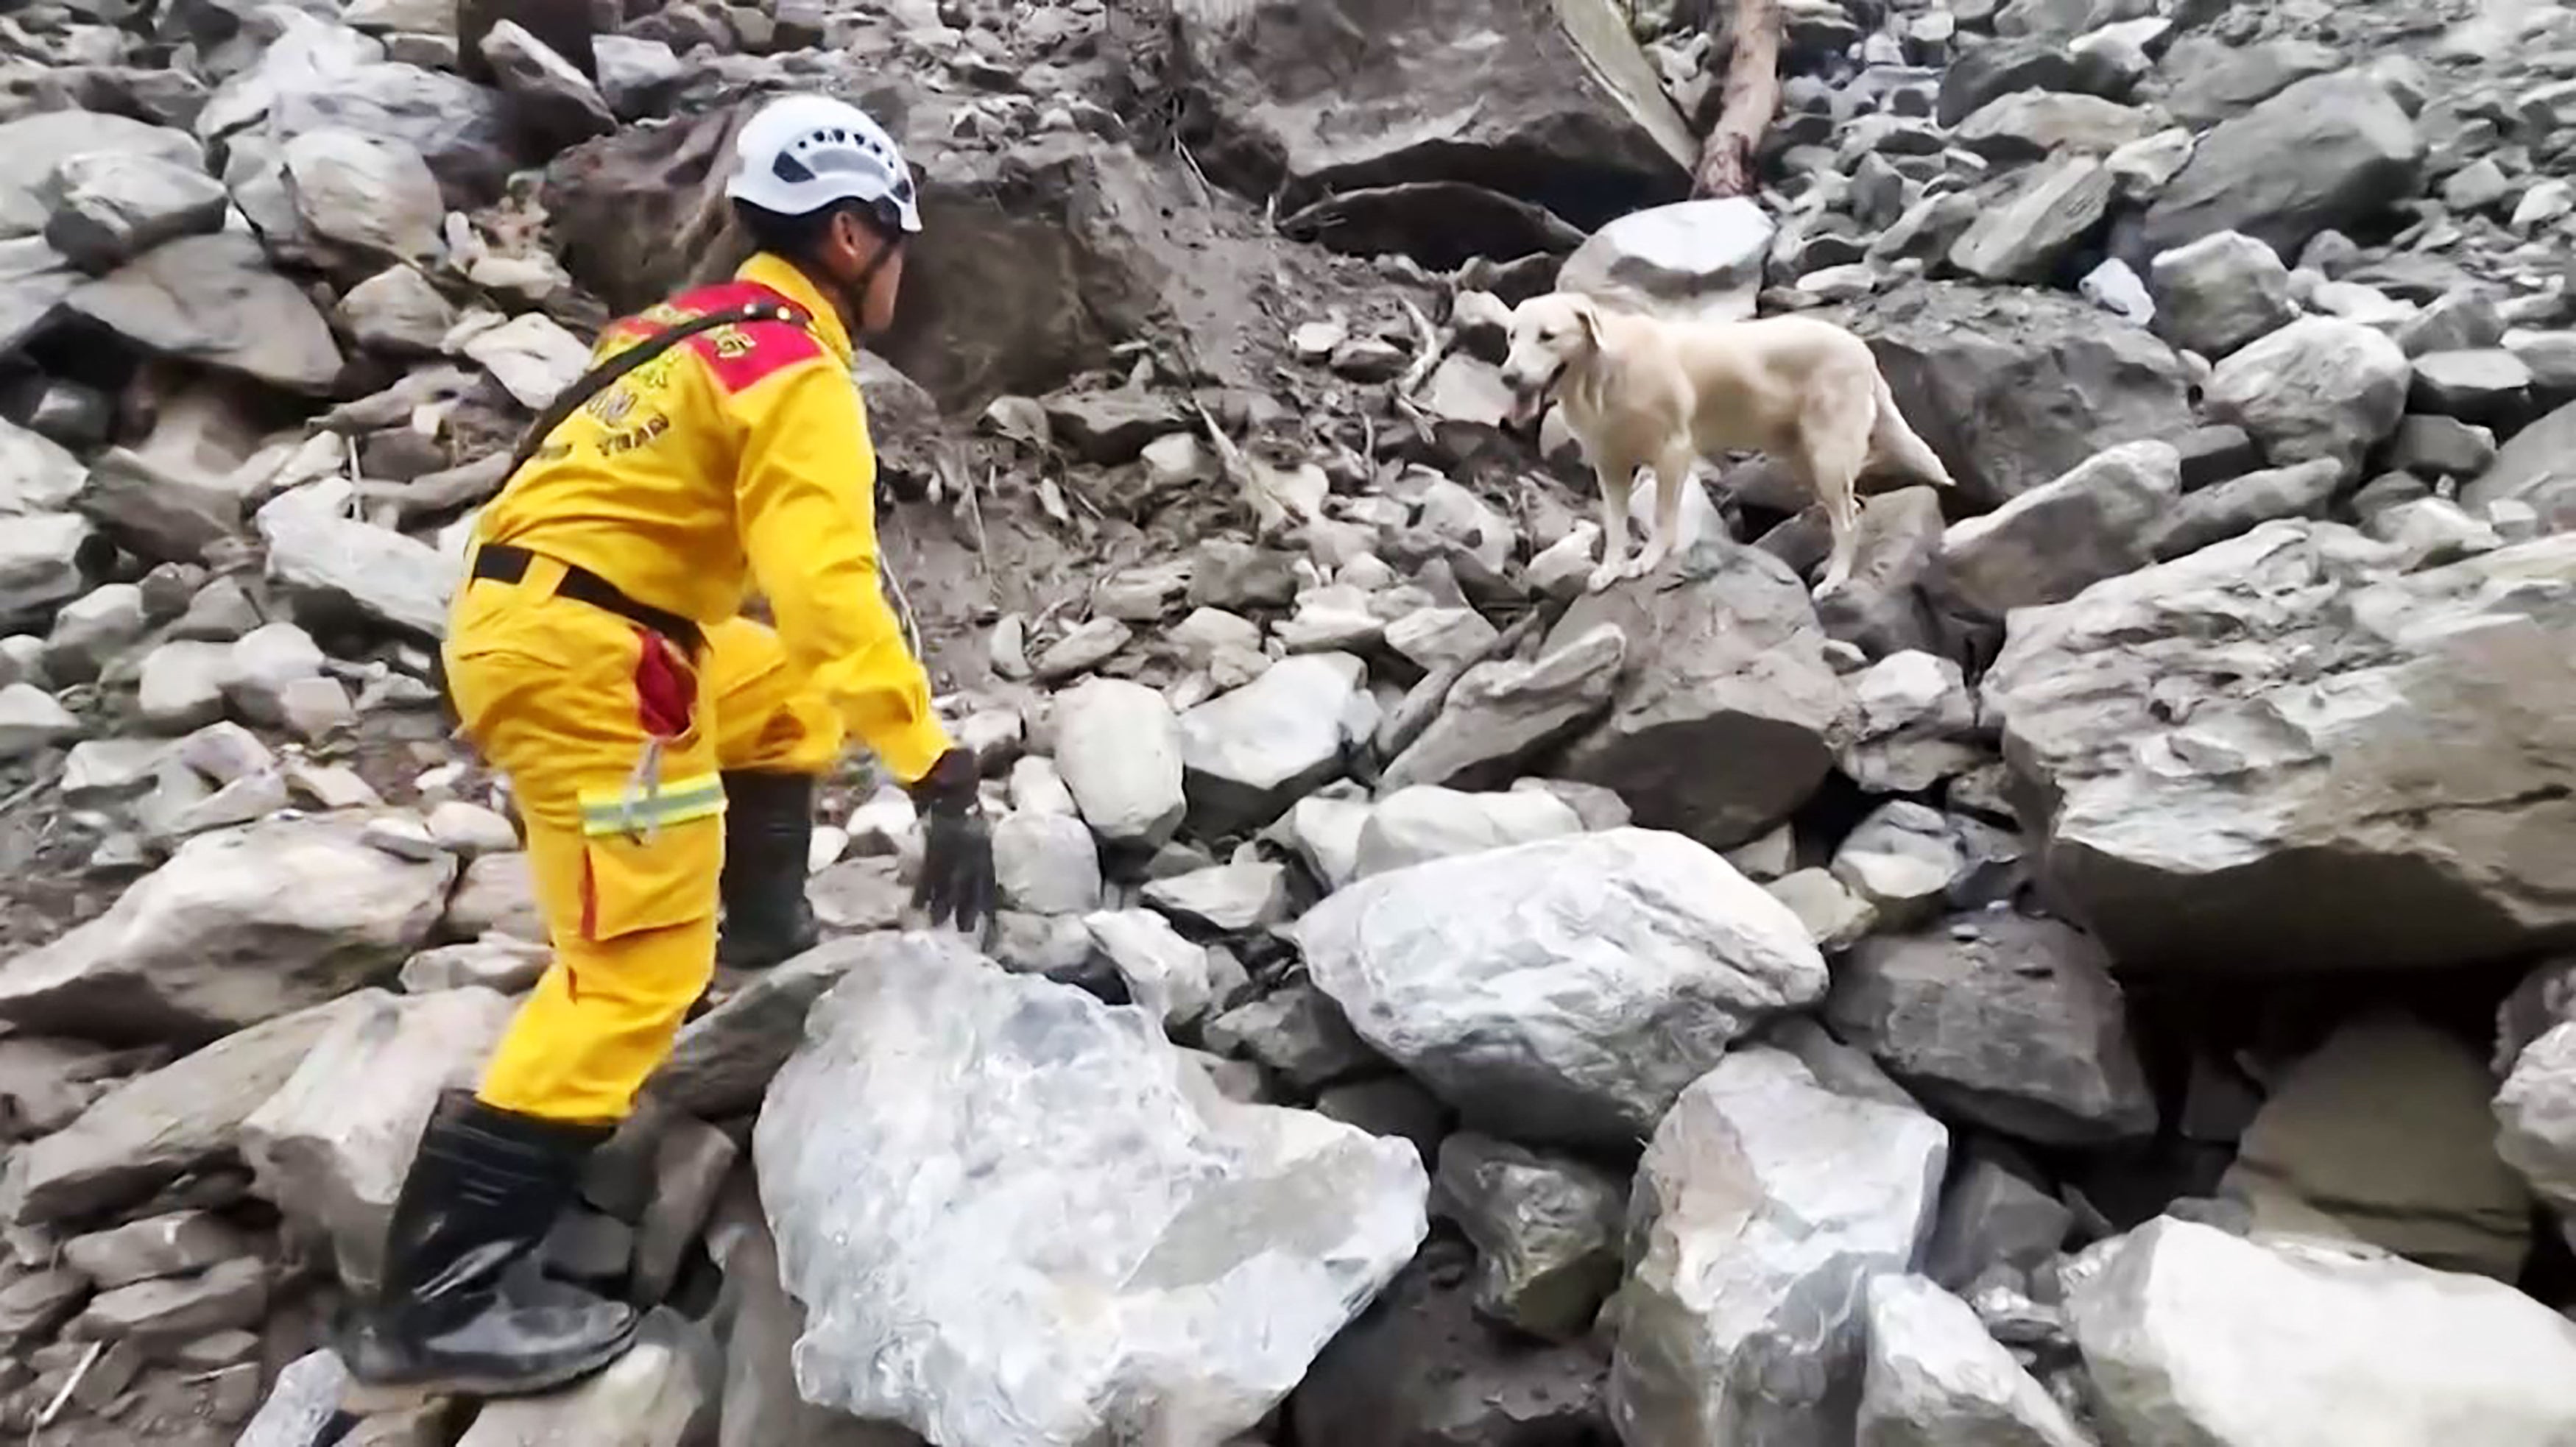 A rescuer locating the body of an earthquake victim with the help of Roger